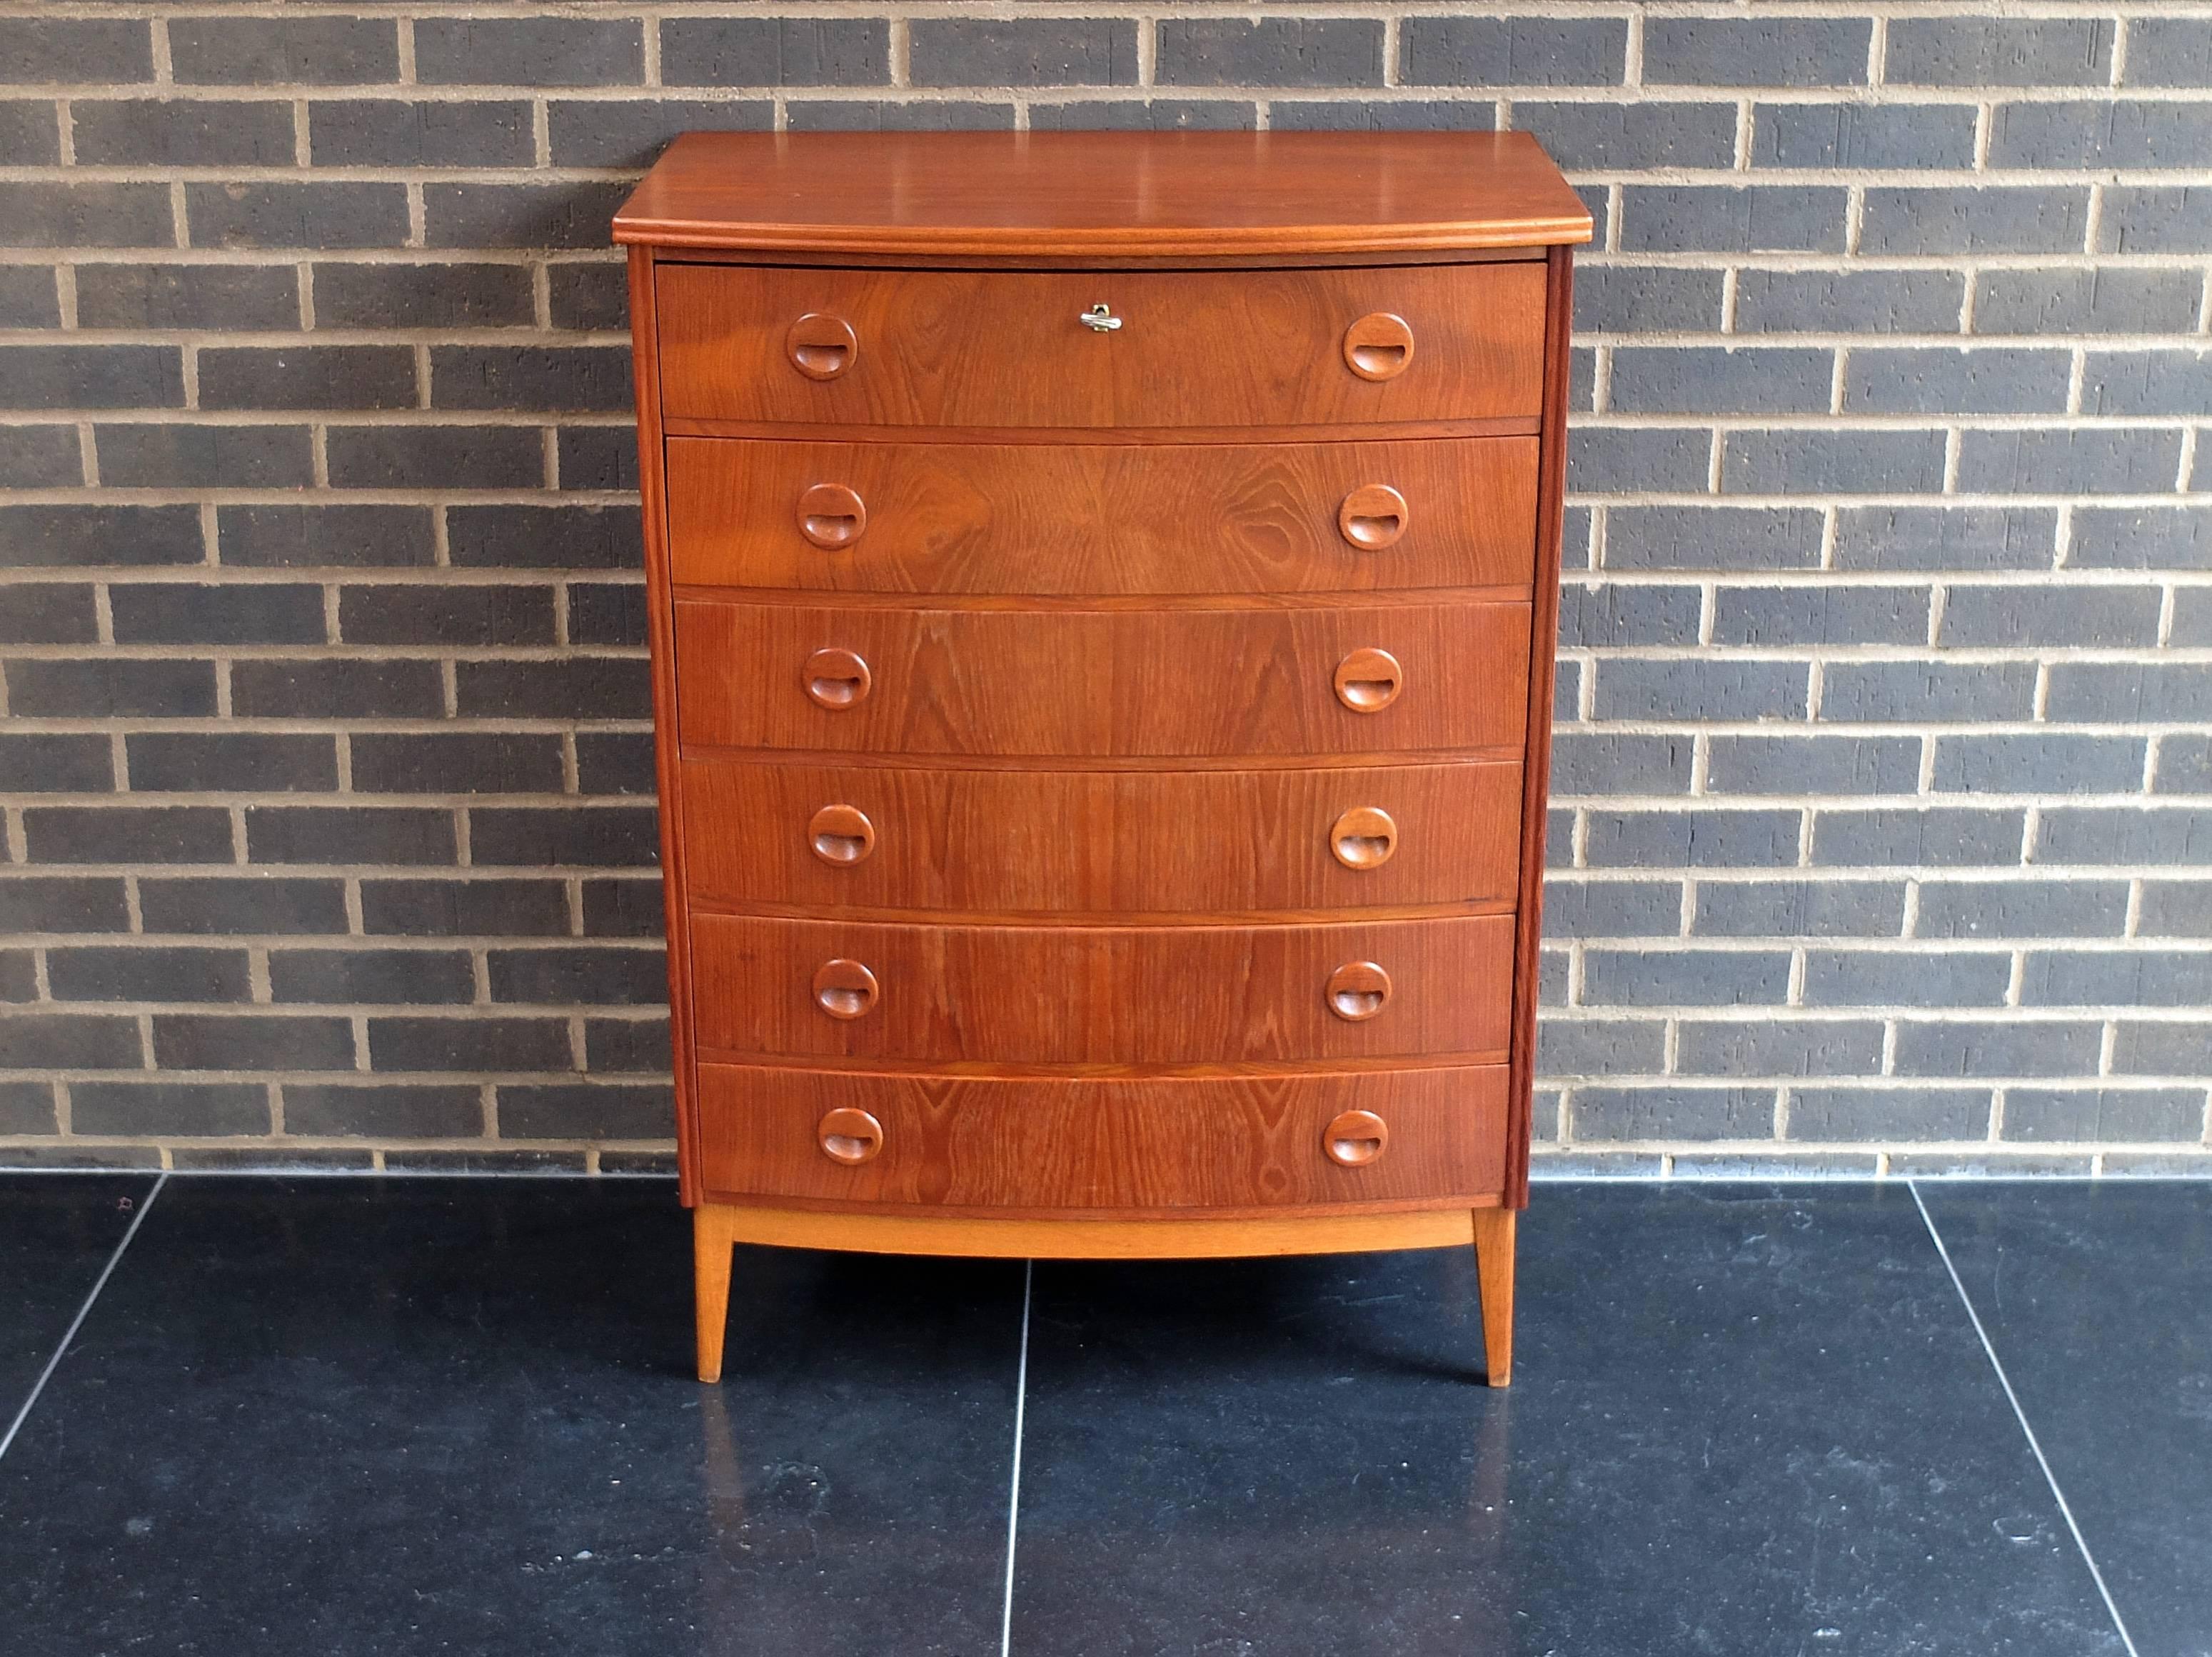 Kai Kristiansen Teak and Oak Bow fronted Dresser Chest of Drawers 1960's Danish In Excellent Condition For Sale In London, GB